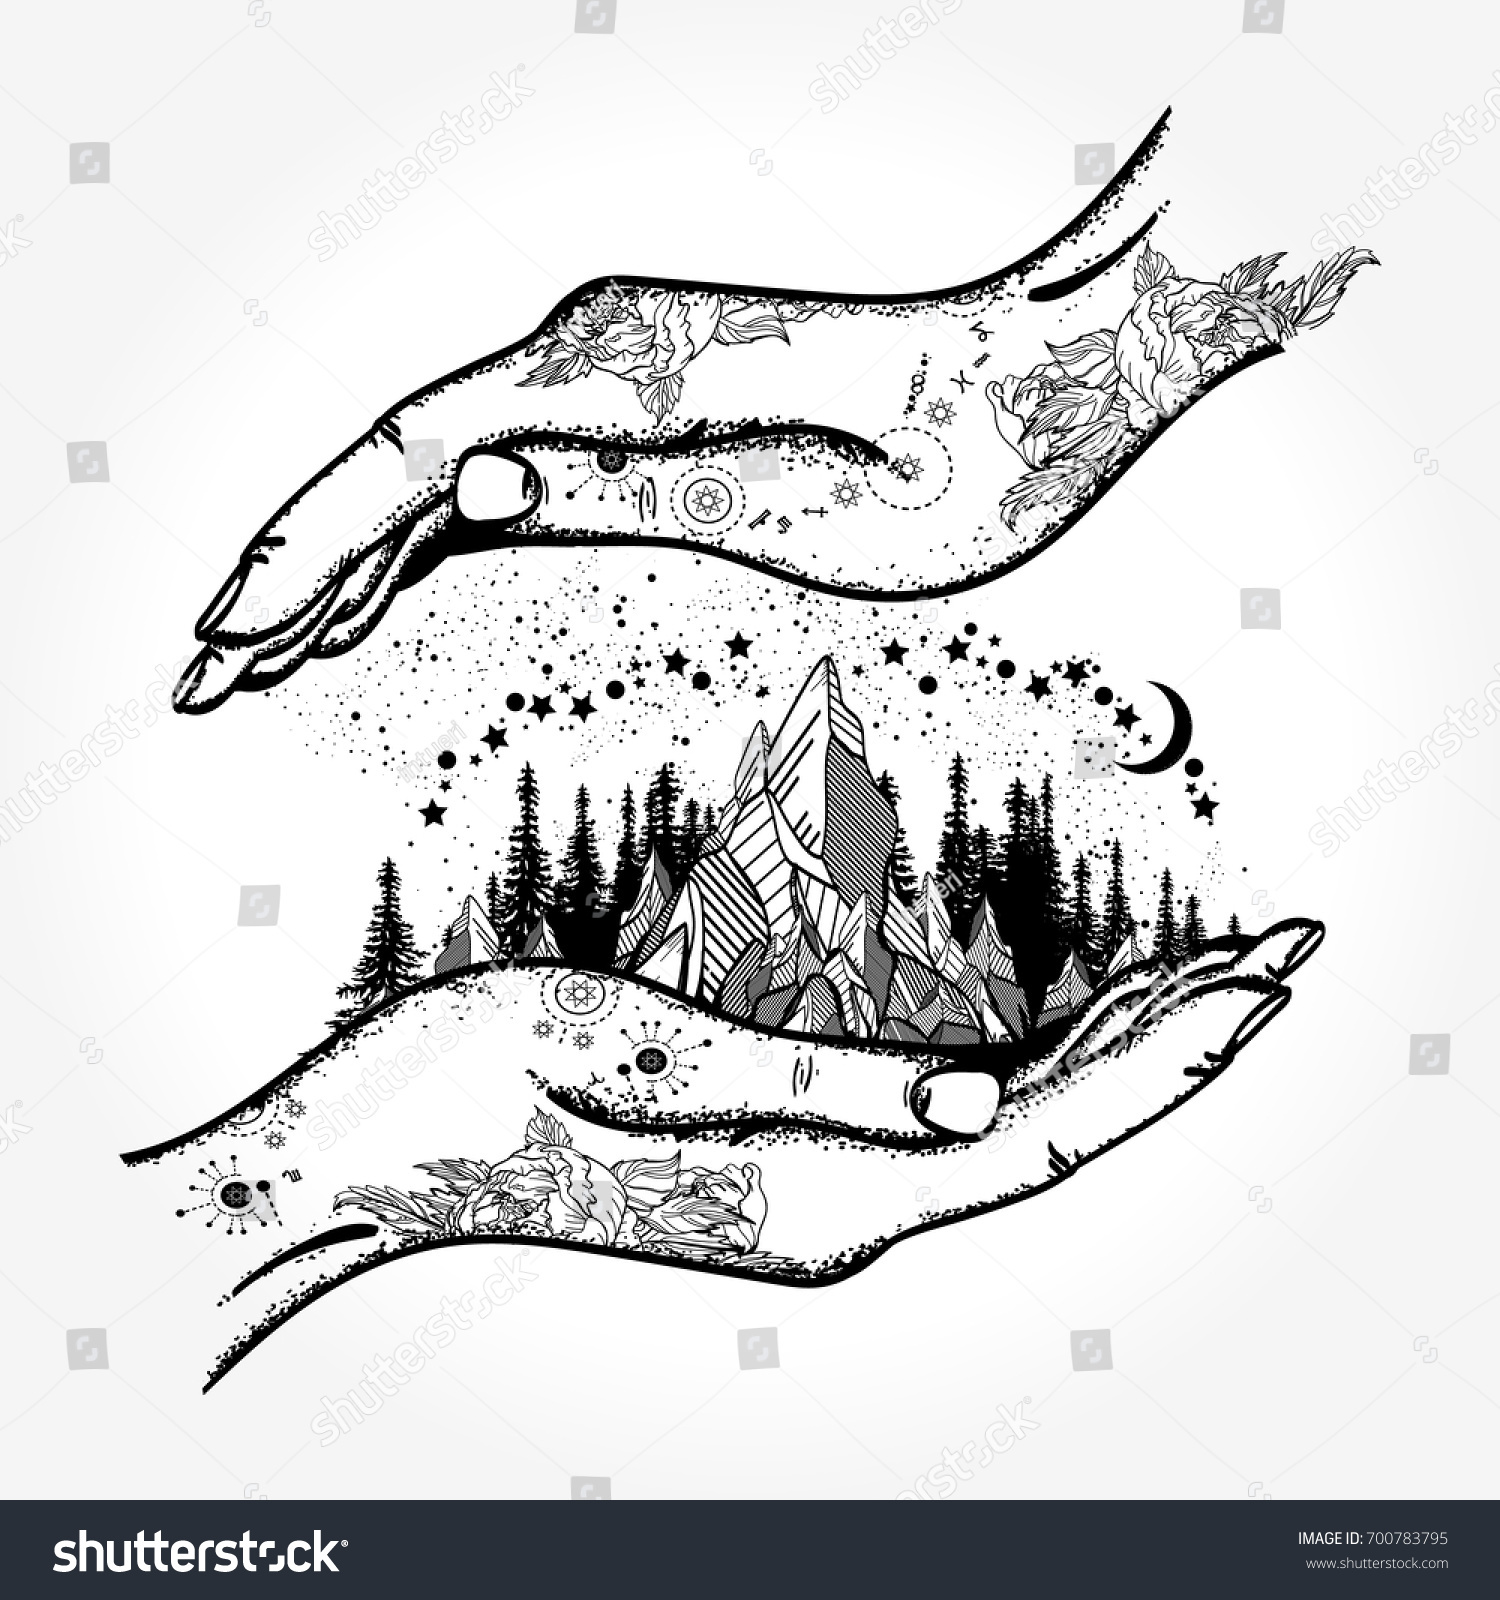 Hands Mountains Tattoo Tshirt Design Symbol Stock Vector (Royalty Free ...